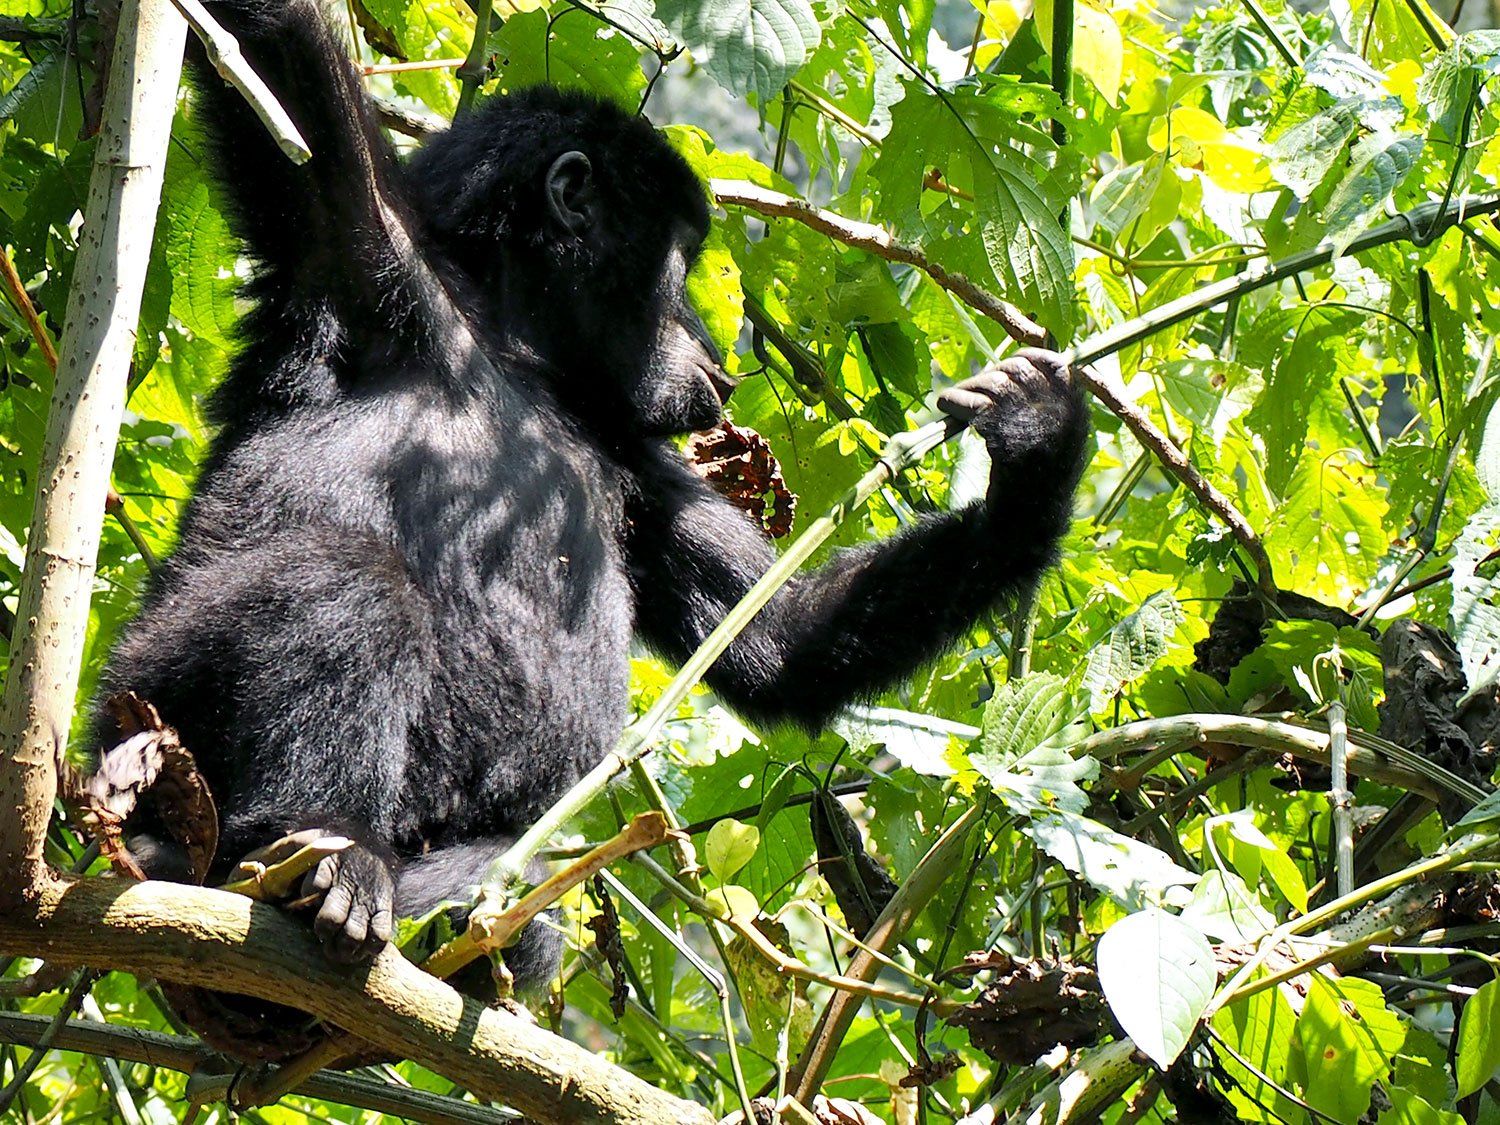 A baby mountain gorilla in Bwindi Impenetrable Forest